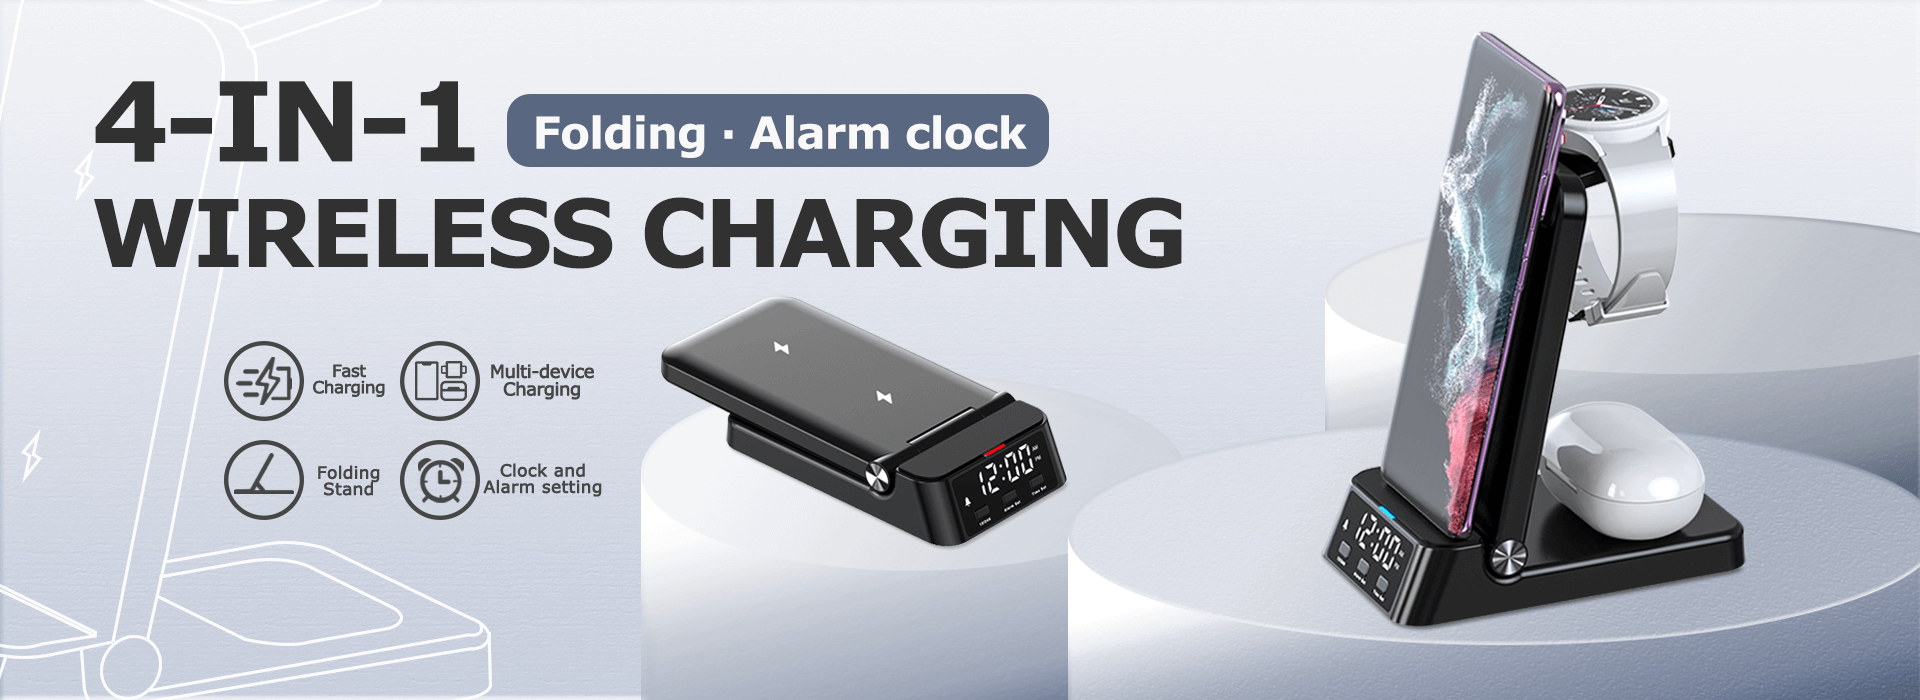 Hot Selling New Products 2023 Wireless Charger Stand 4-in-1 Qi Mobile Phone Fast Charging Station With Alarm Clock For iPhone